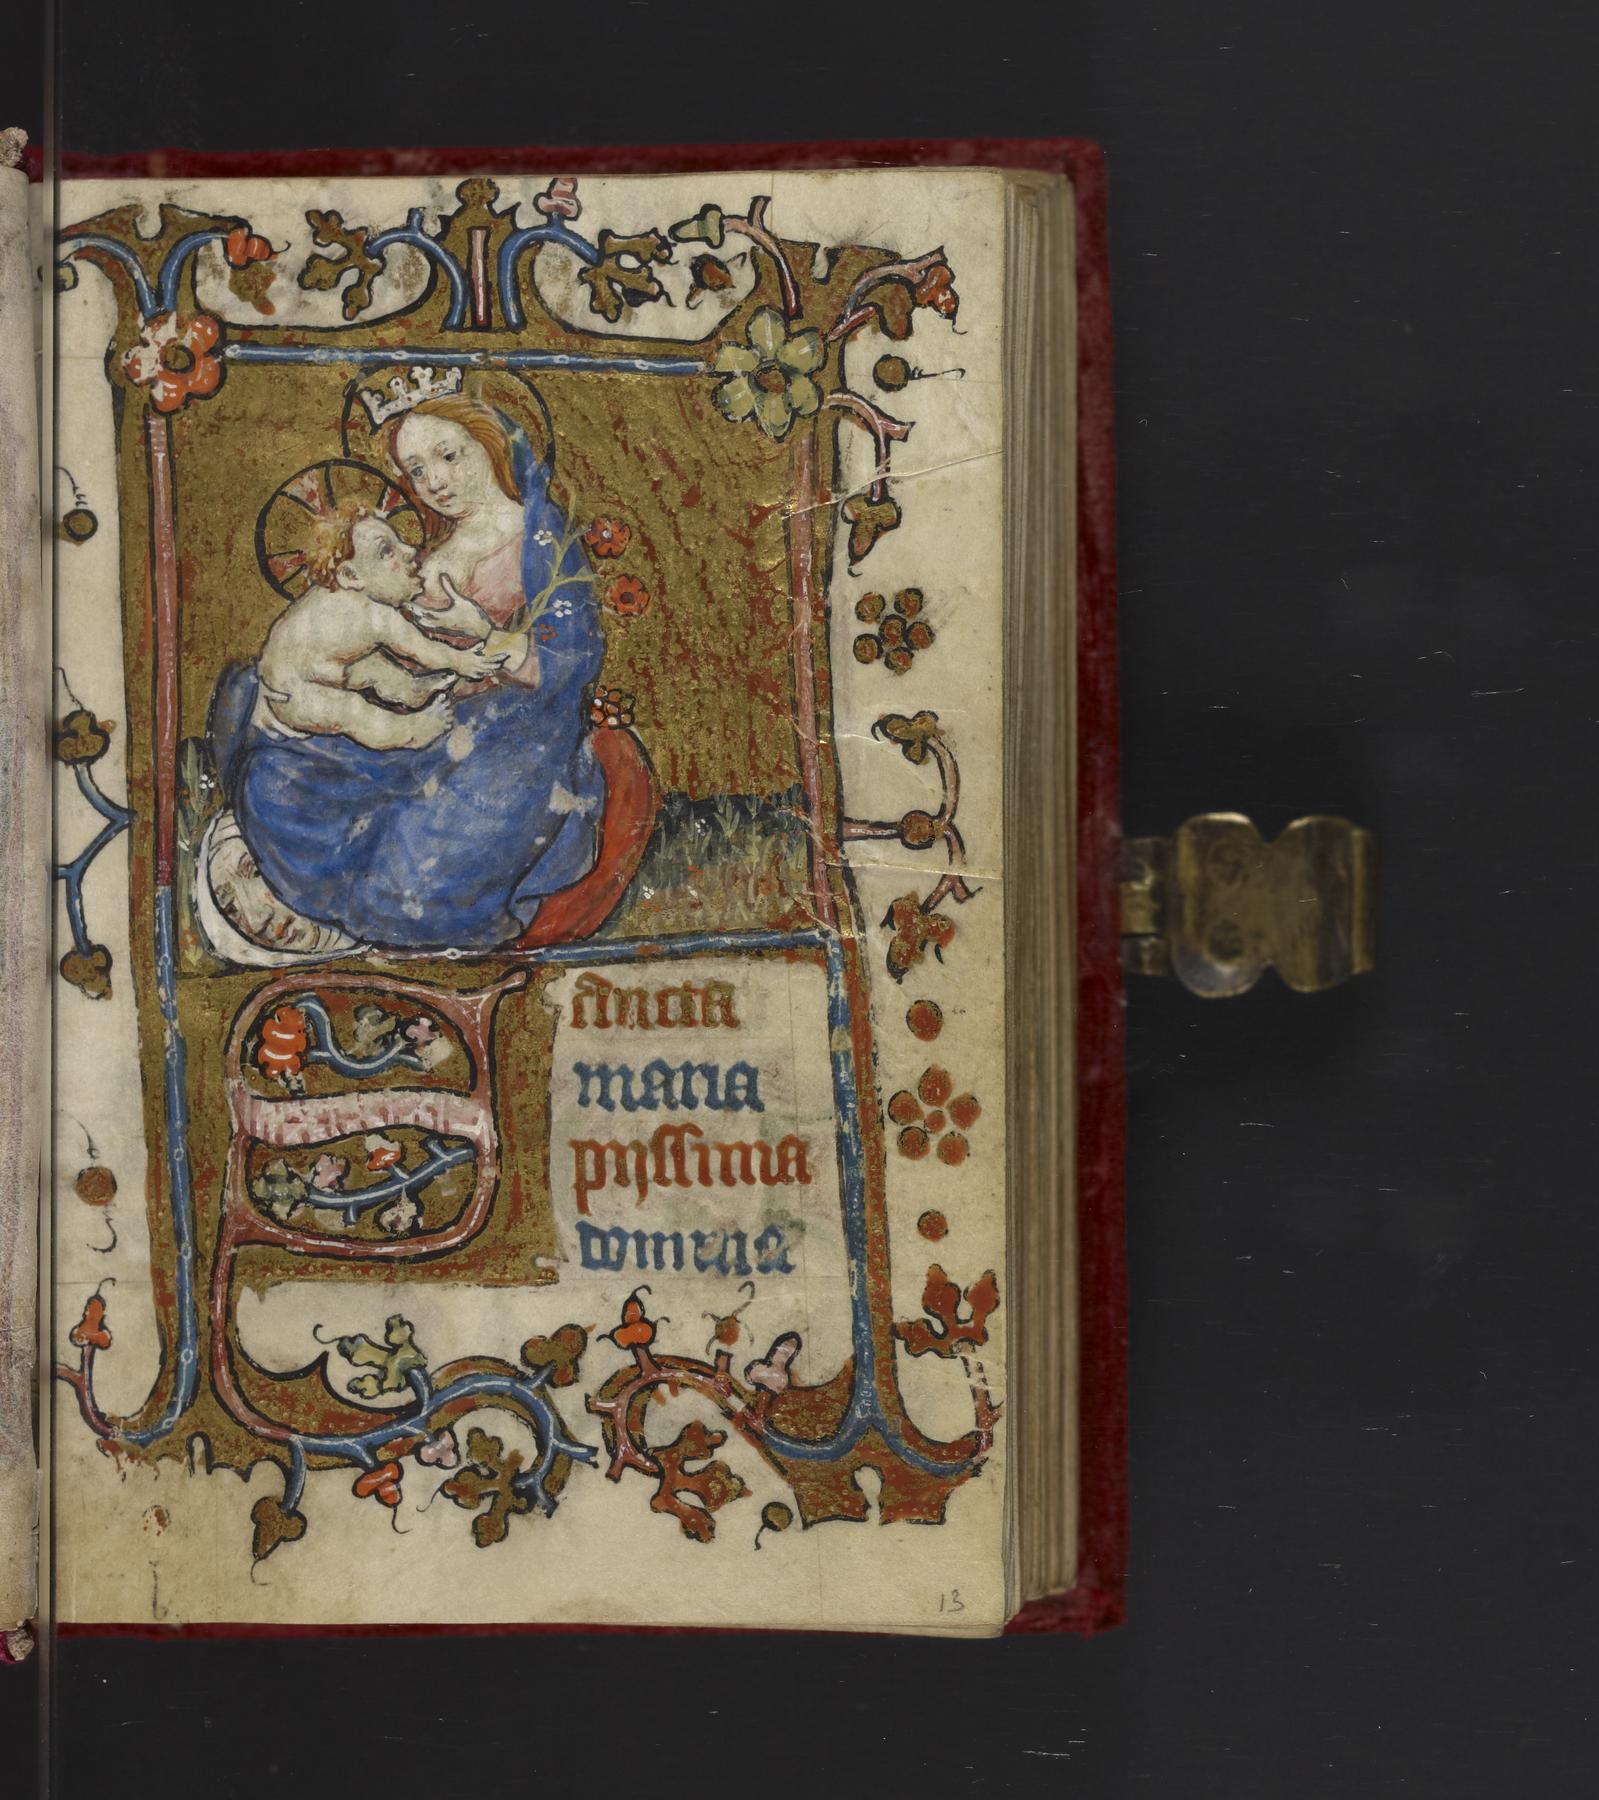 Coffee with a Codex: Book of Hours